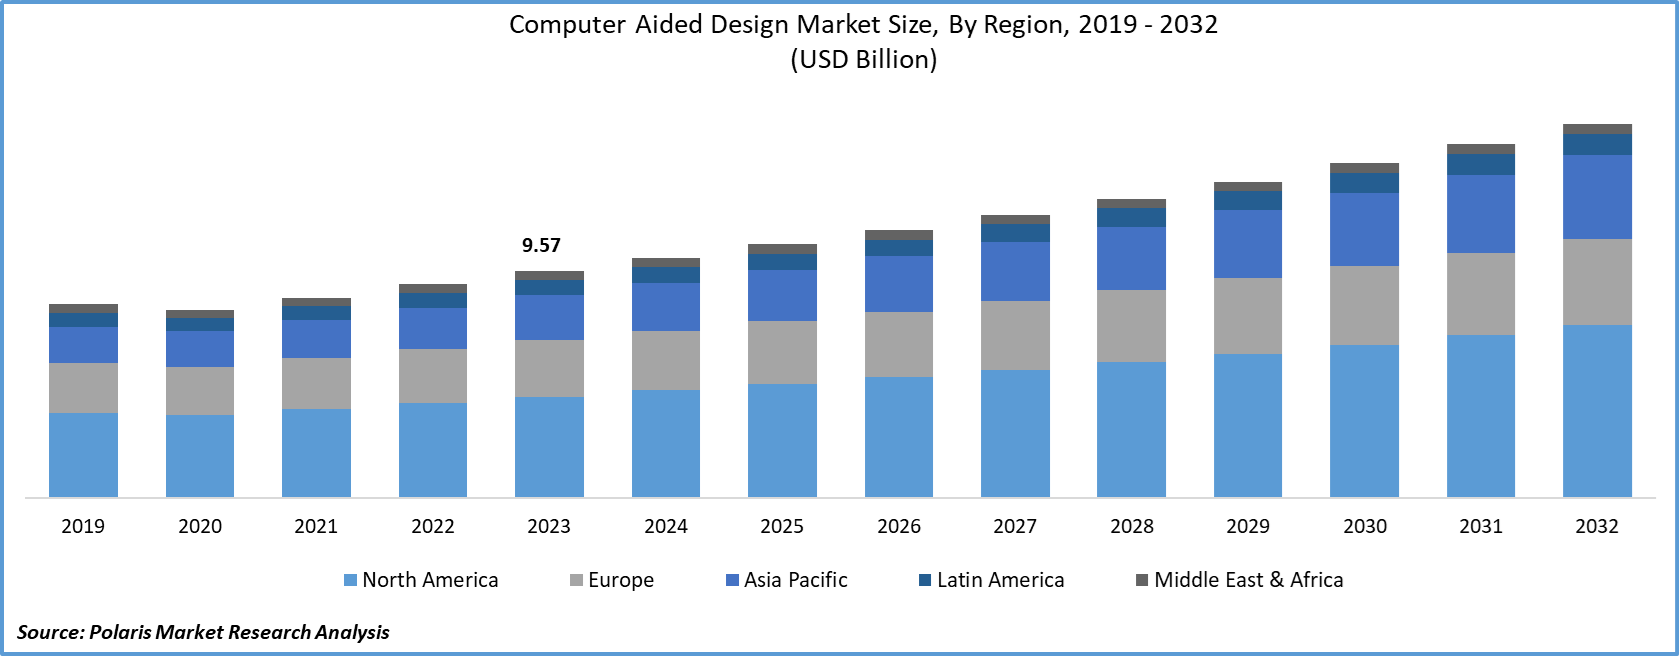 Computer Aided Design Market Size